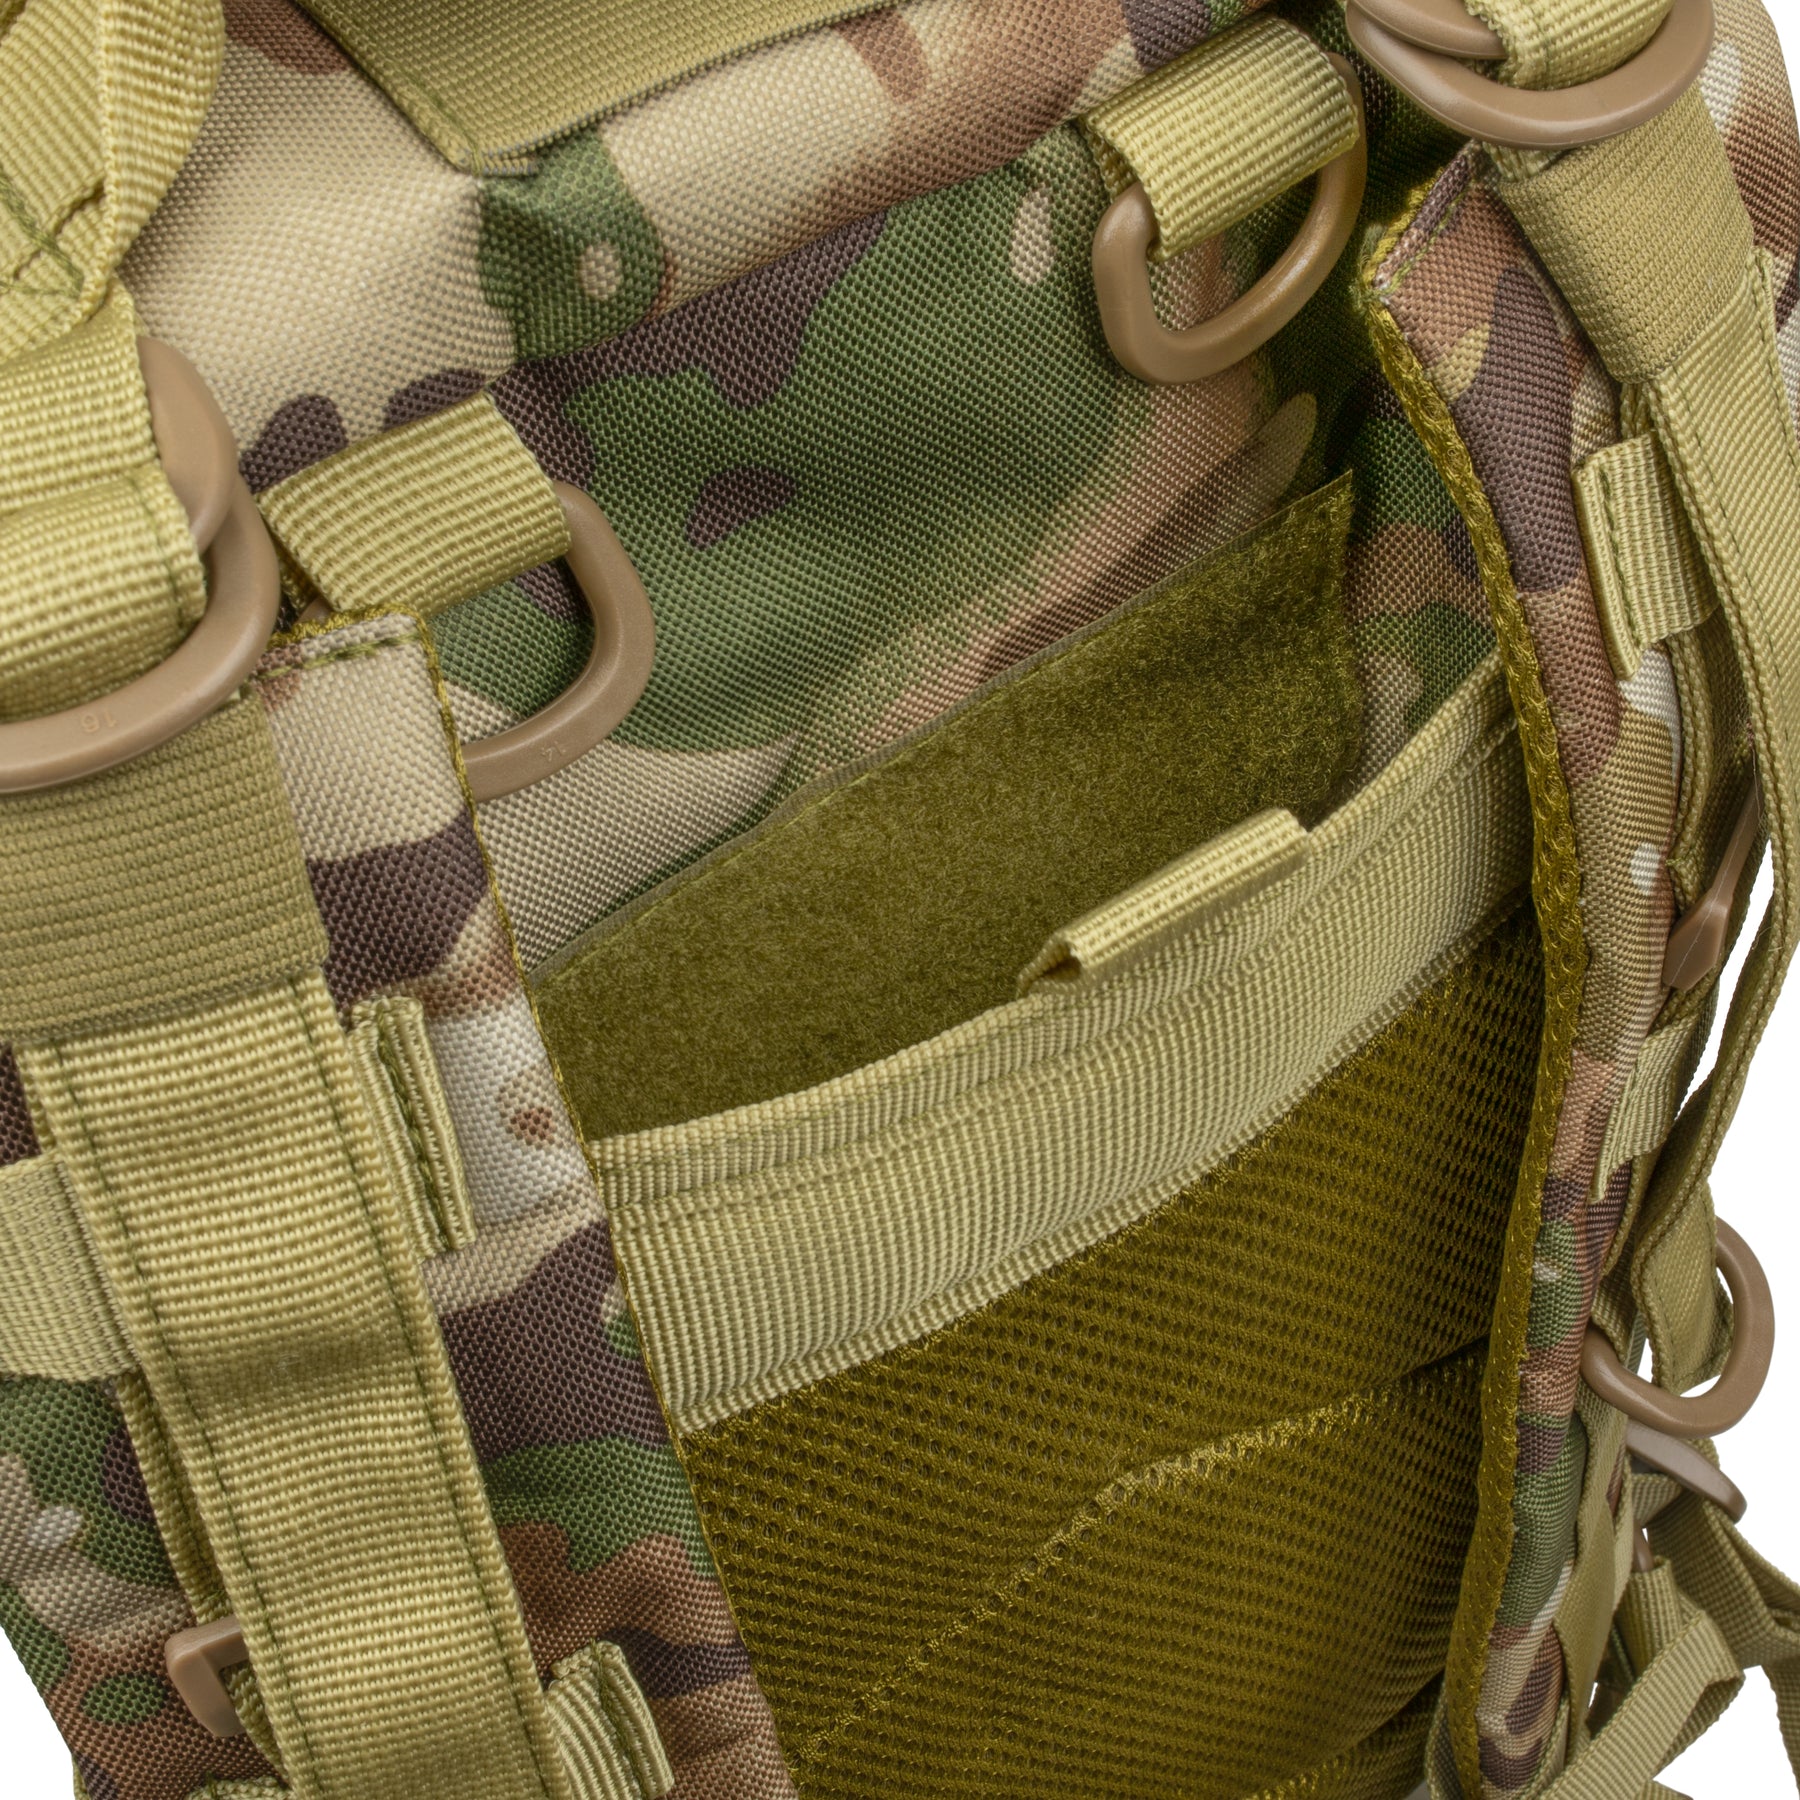 HITCo™ Assault Pack | MOLLE Backpack